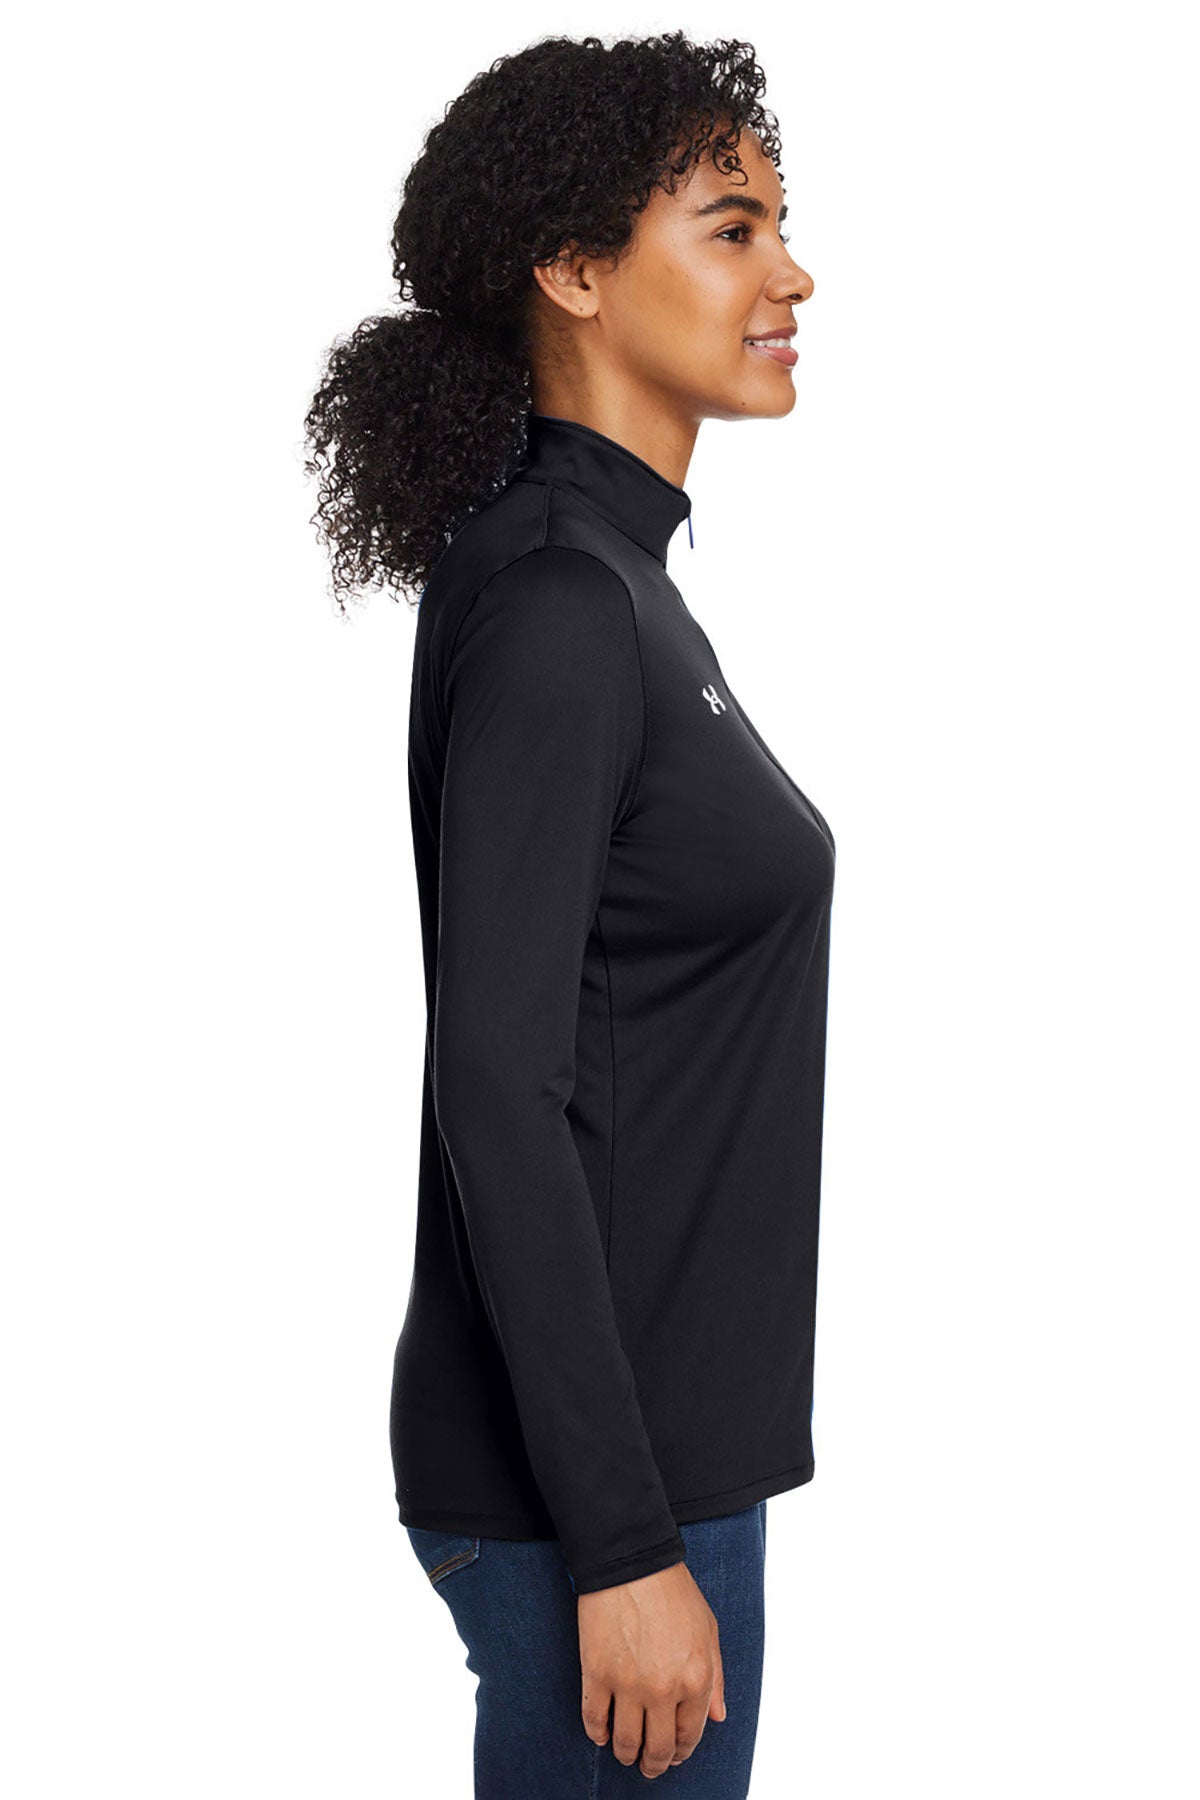 Under Armour Ladies Tech  Quarter-Zip, Black [GuidePoint Security]